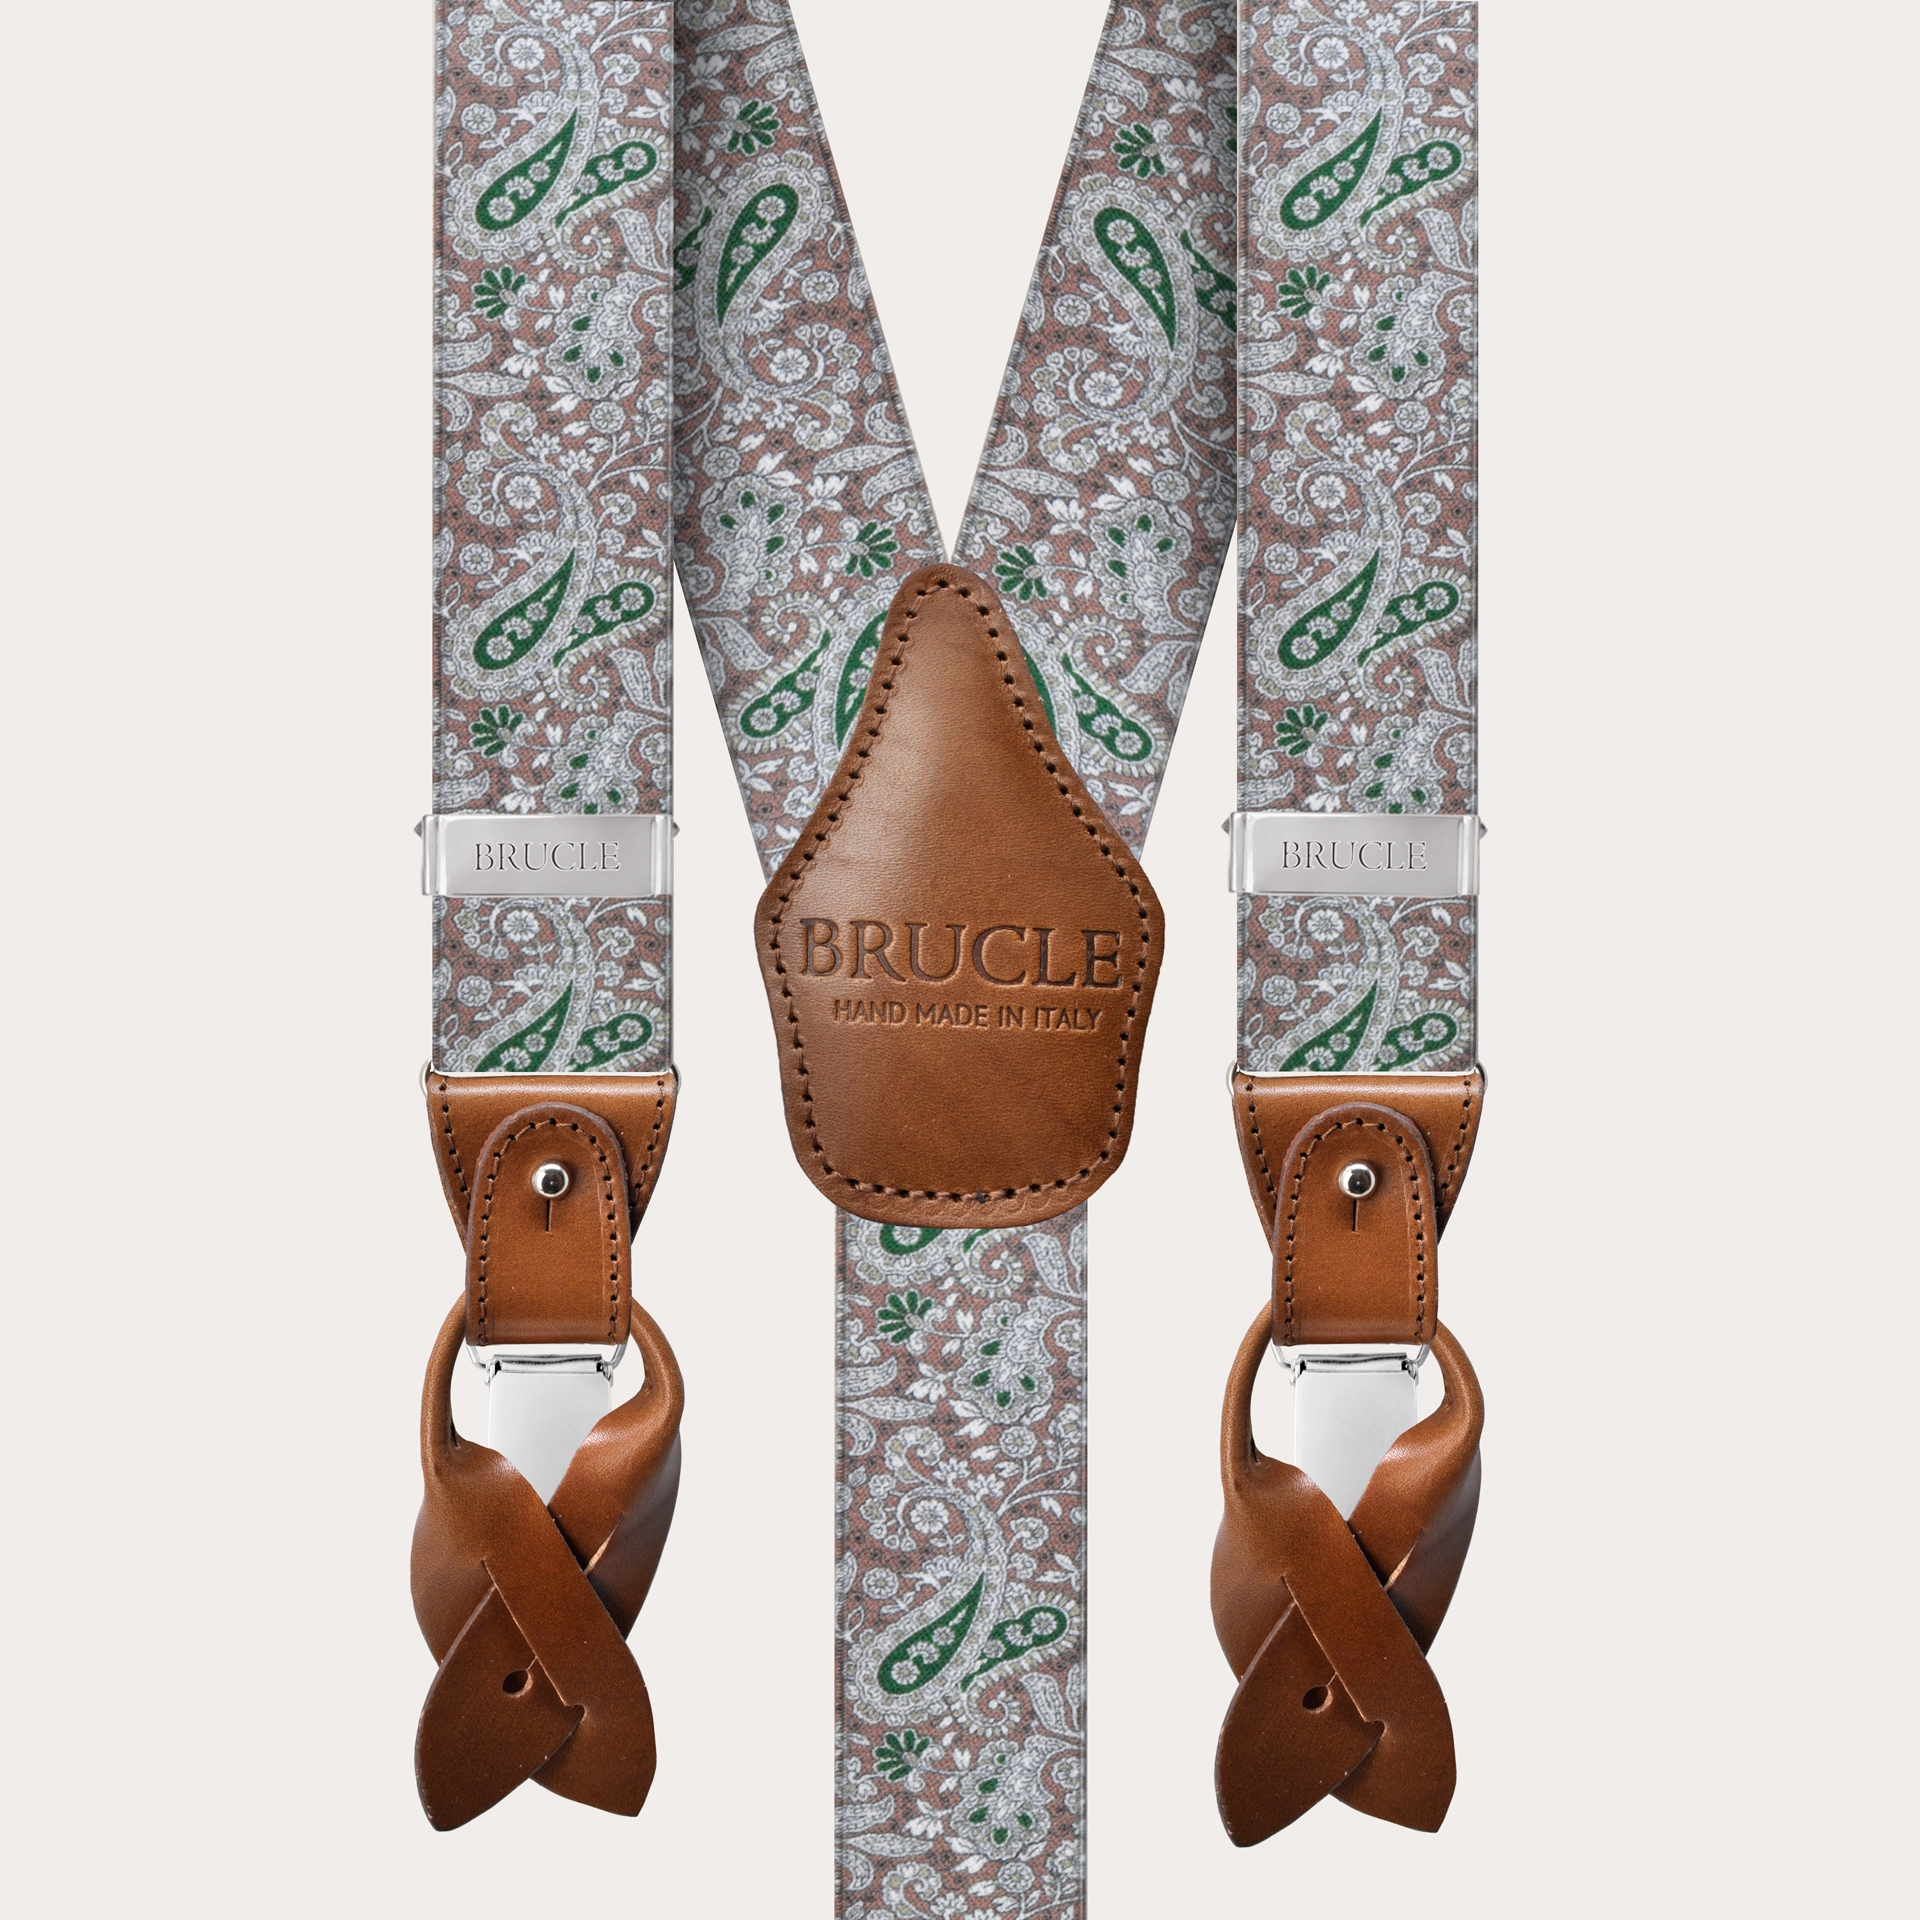 Y-shape elastic suspenders, brown and green cashmere pattern